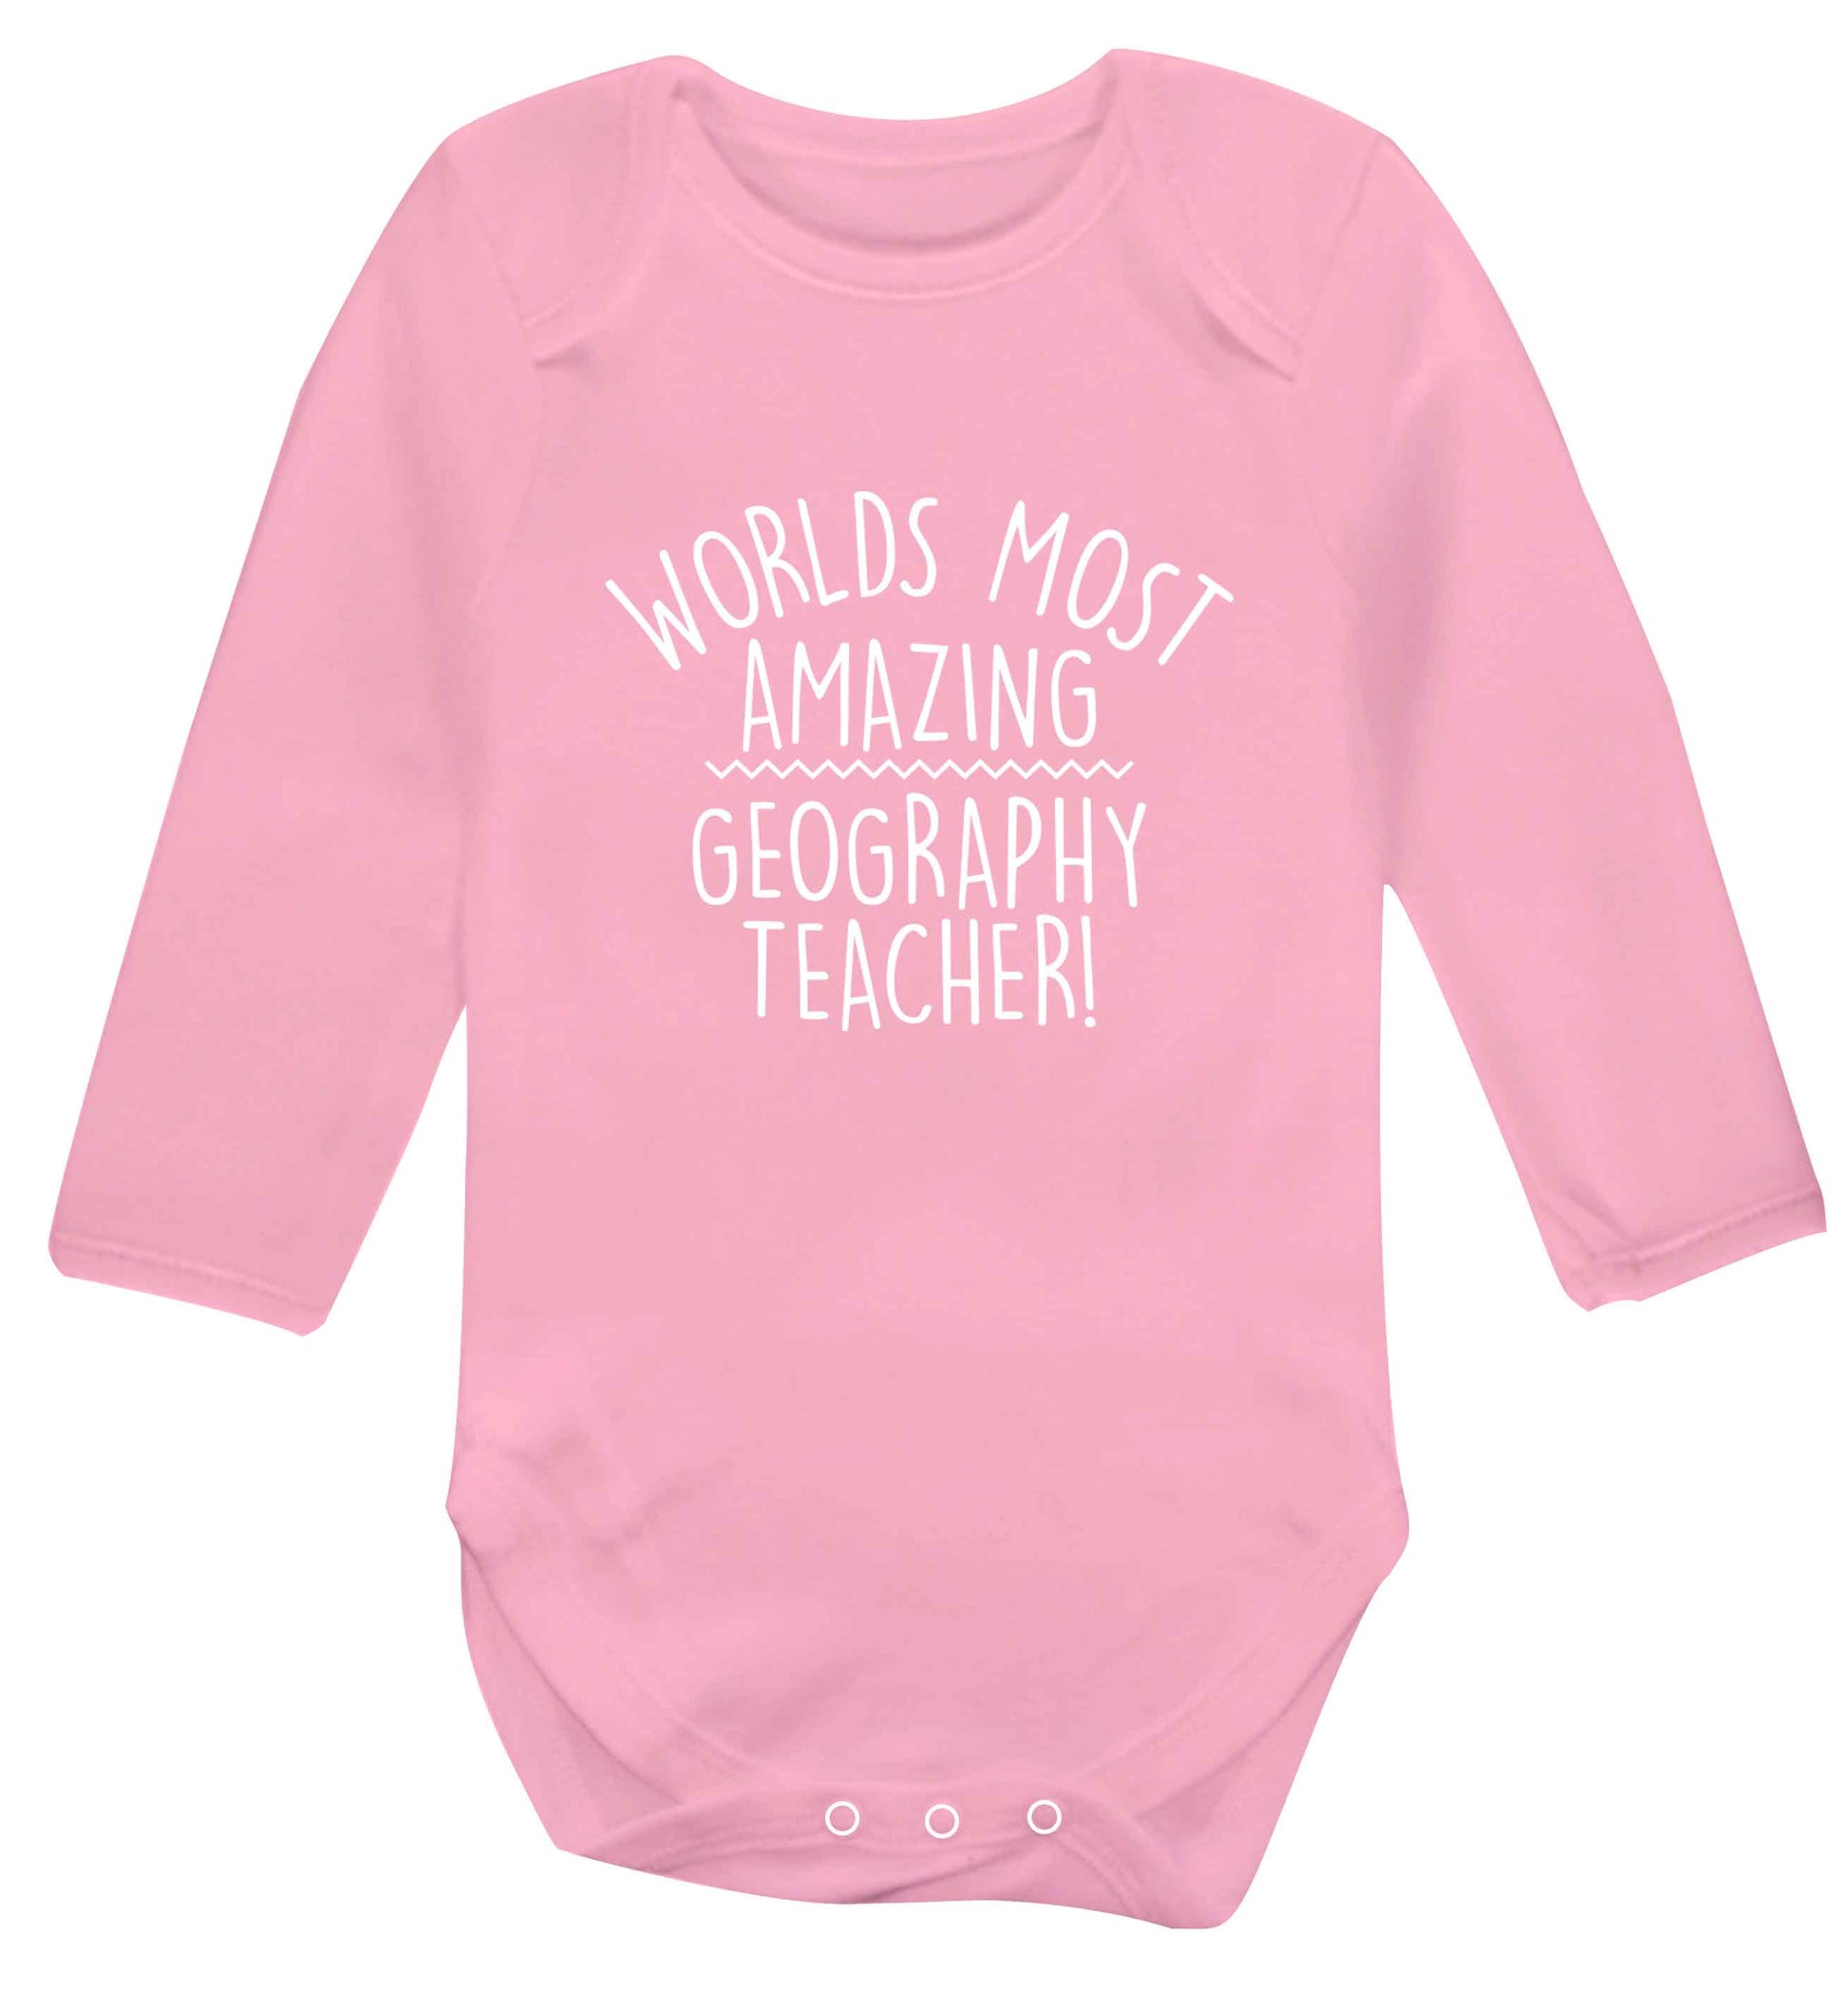 Worlds most amazing geography teacher baby vest long sleeved pale pink 6-12 months